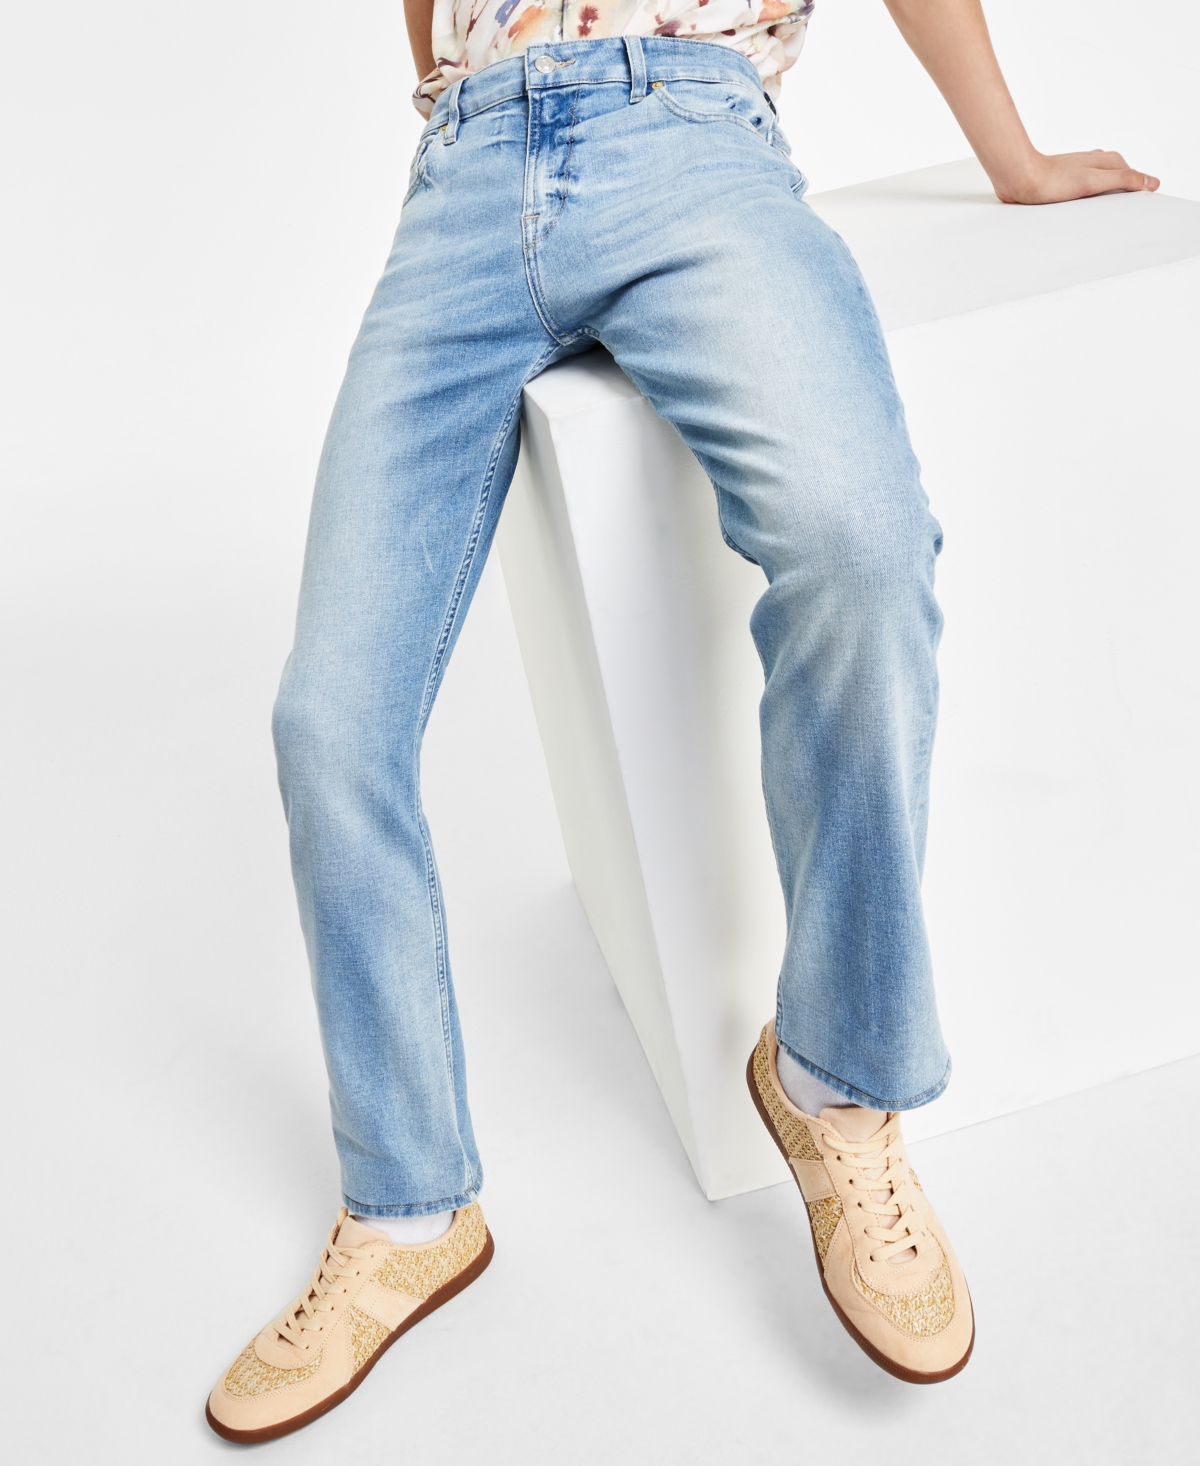 Guess Men's Slim Straight Fit Jeans In Fletcher